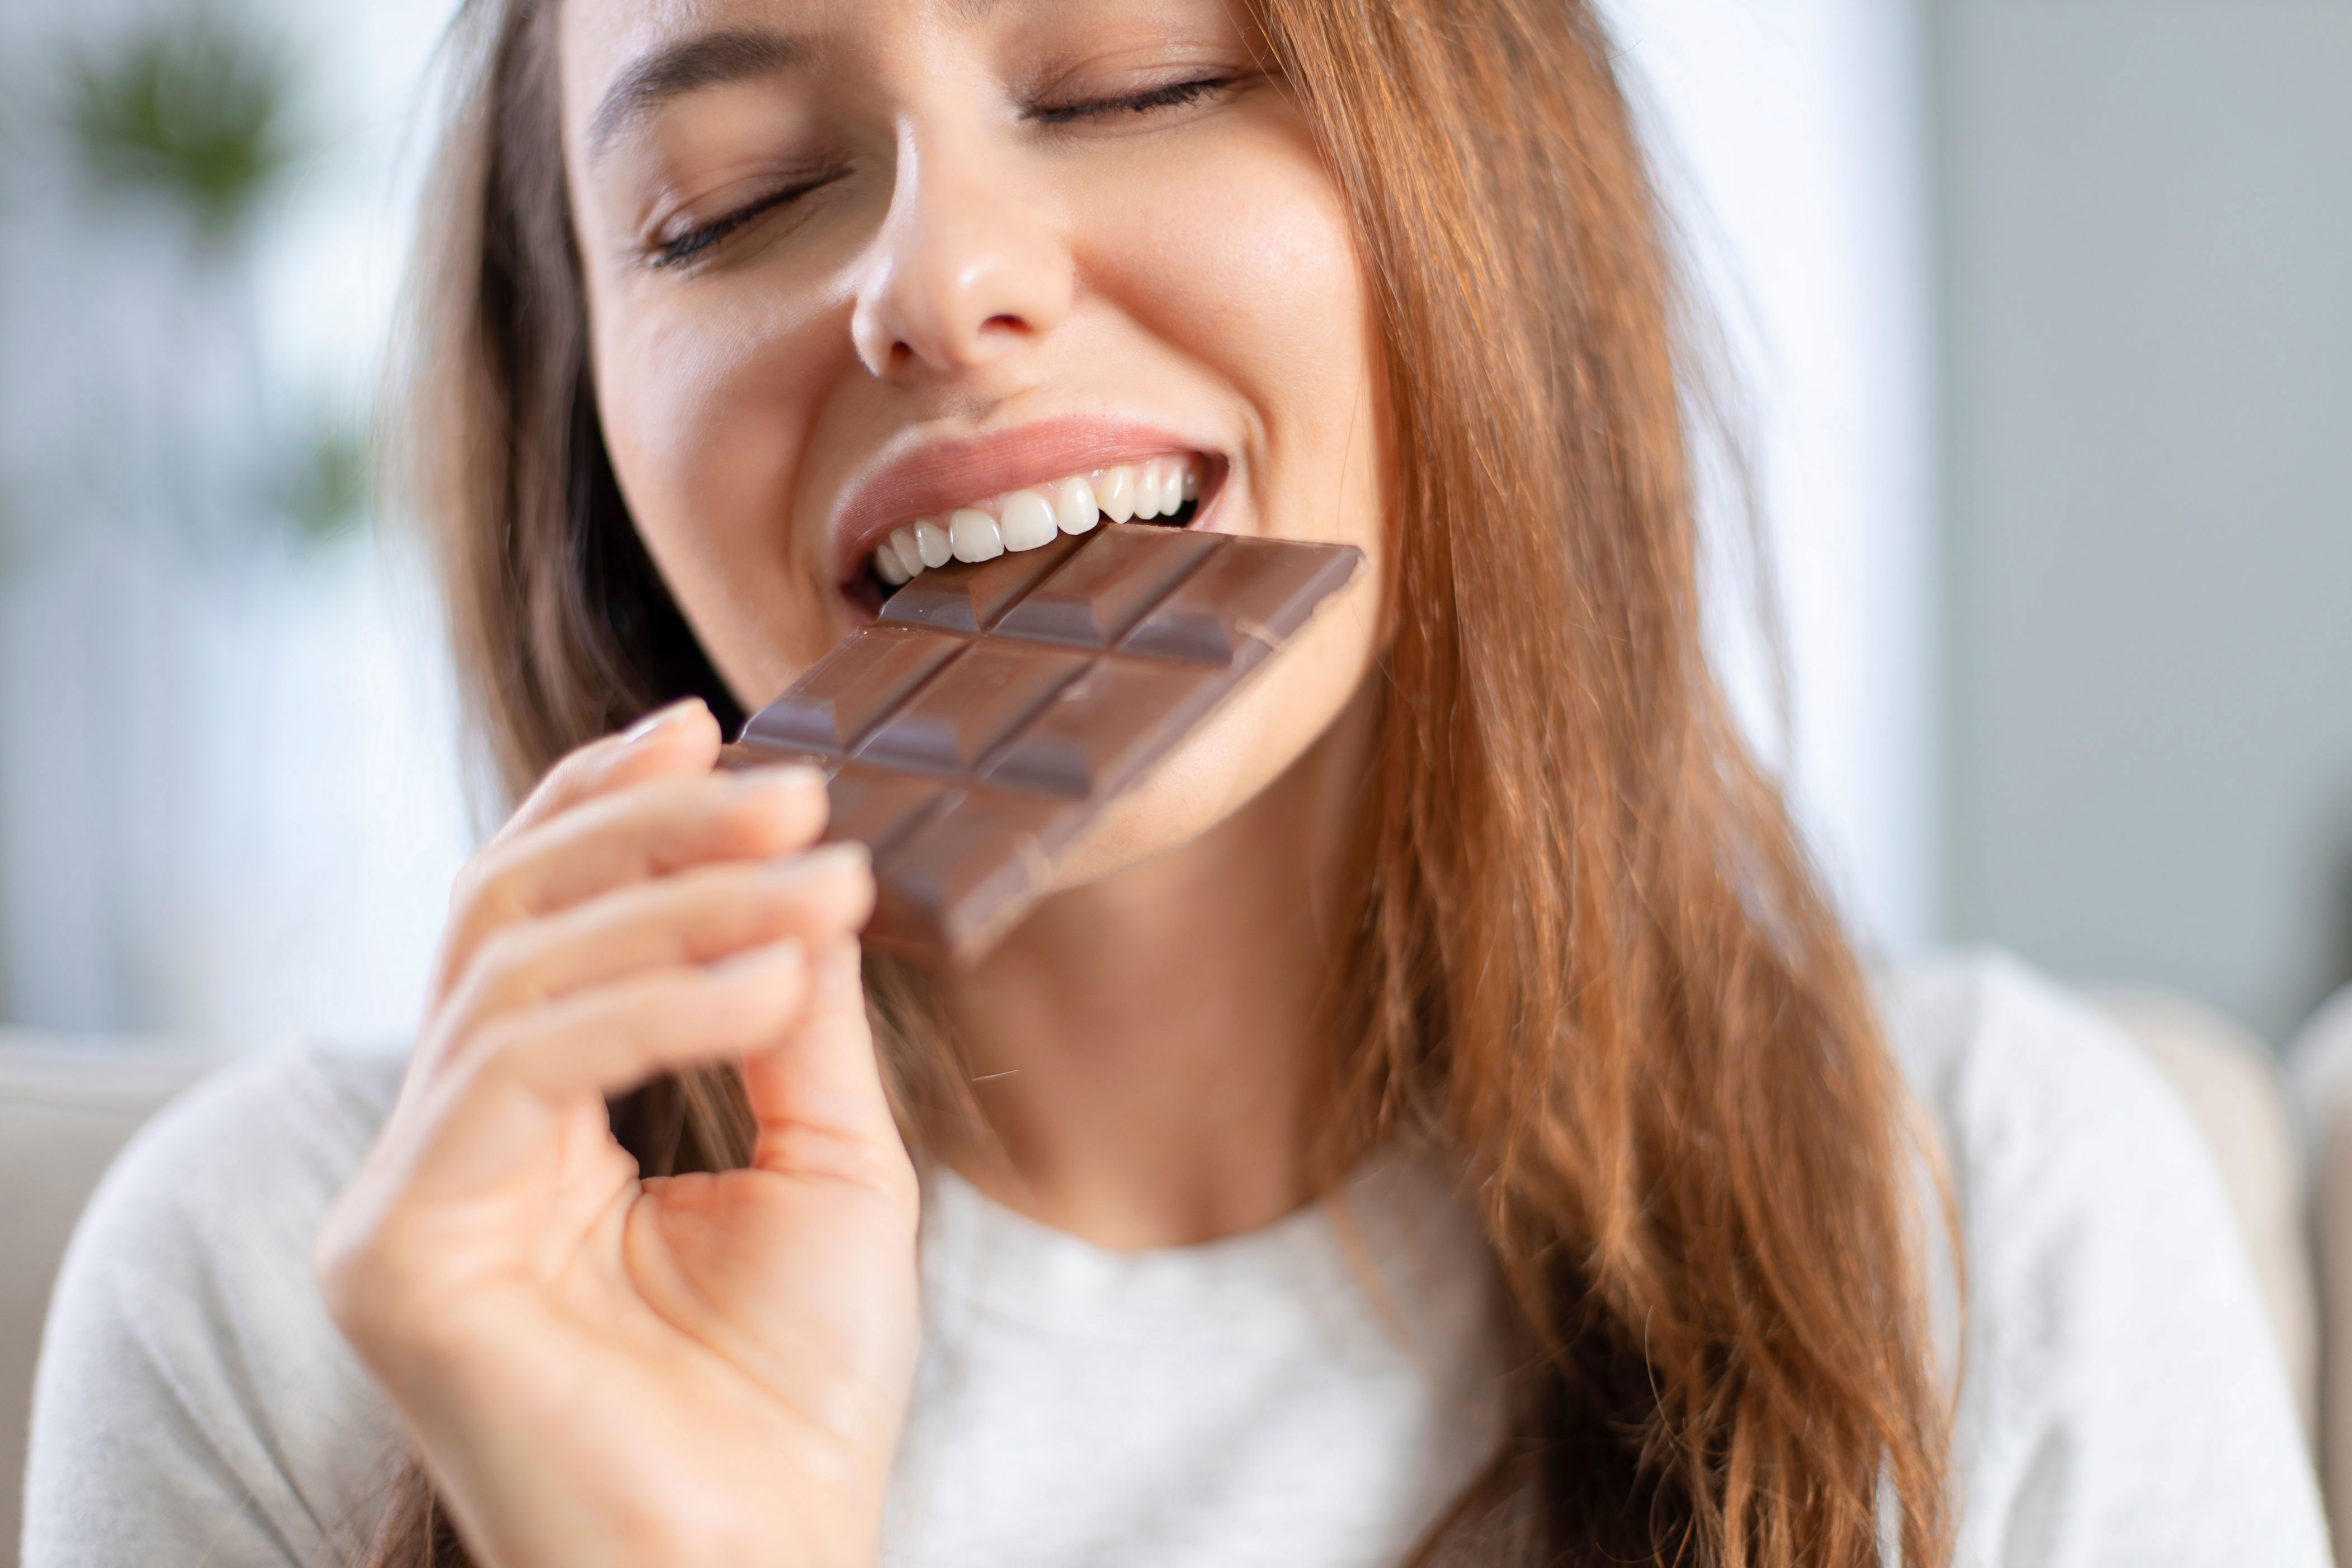 Why Women Crave Chocolate At Certain Times Of Month According To Scientists